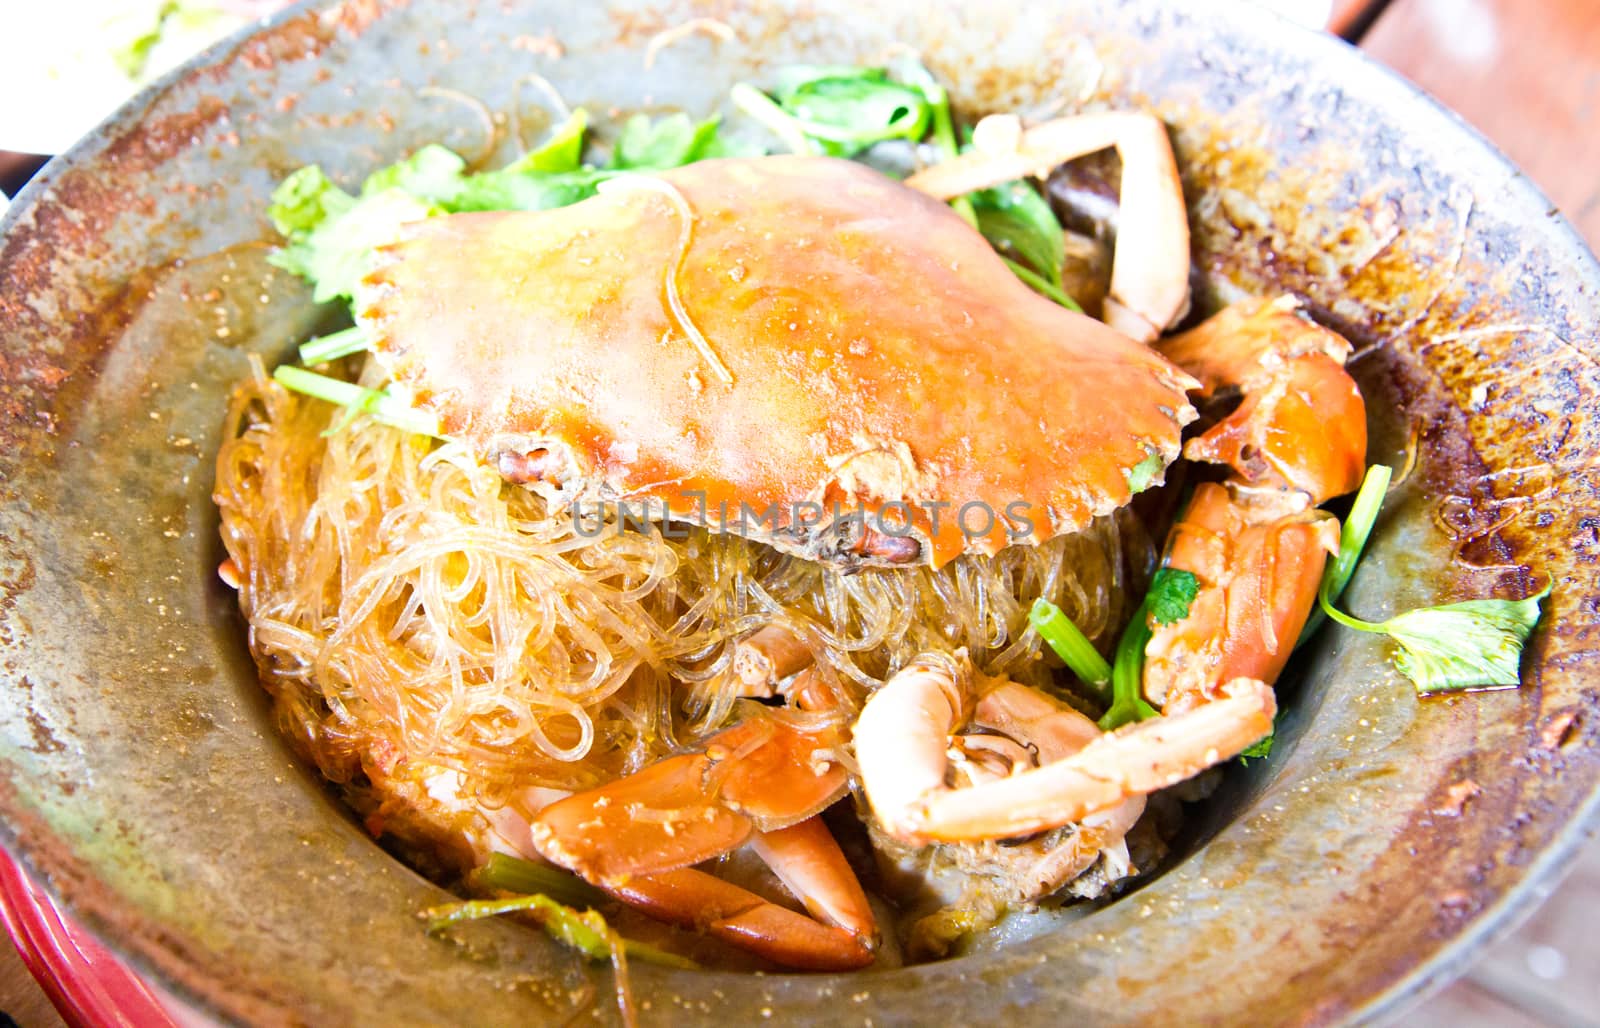 Stream big crab with vermicelli and herb by tisskananat